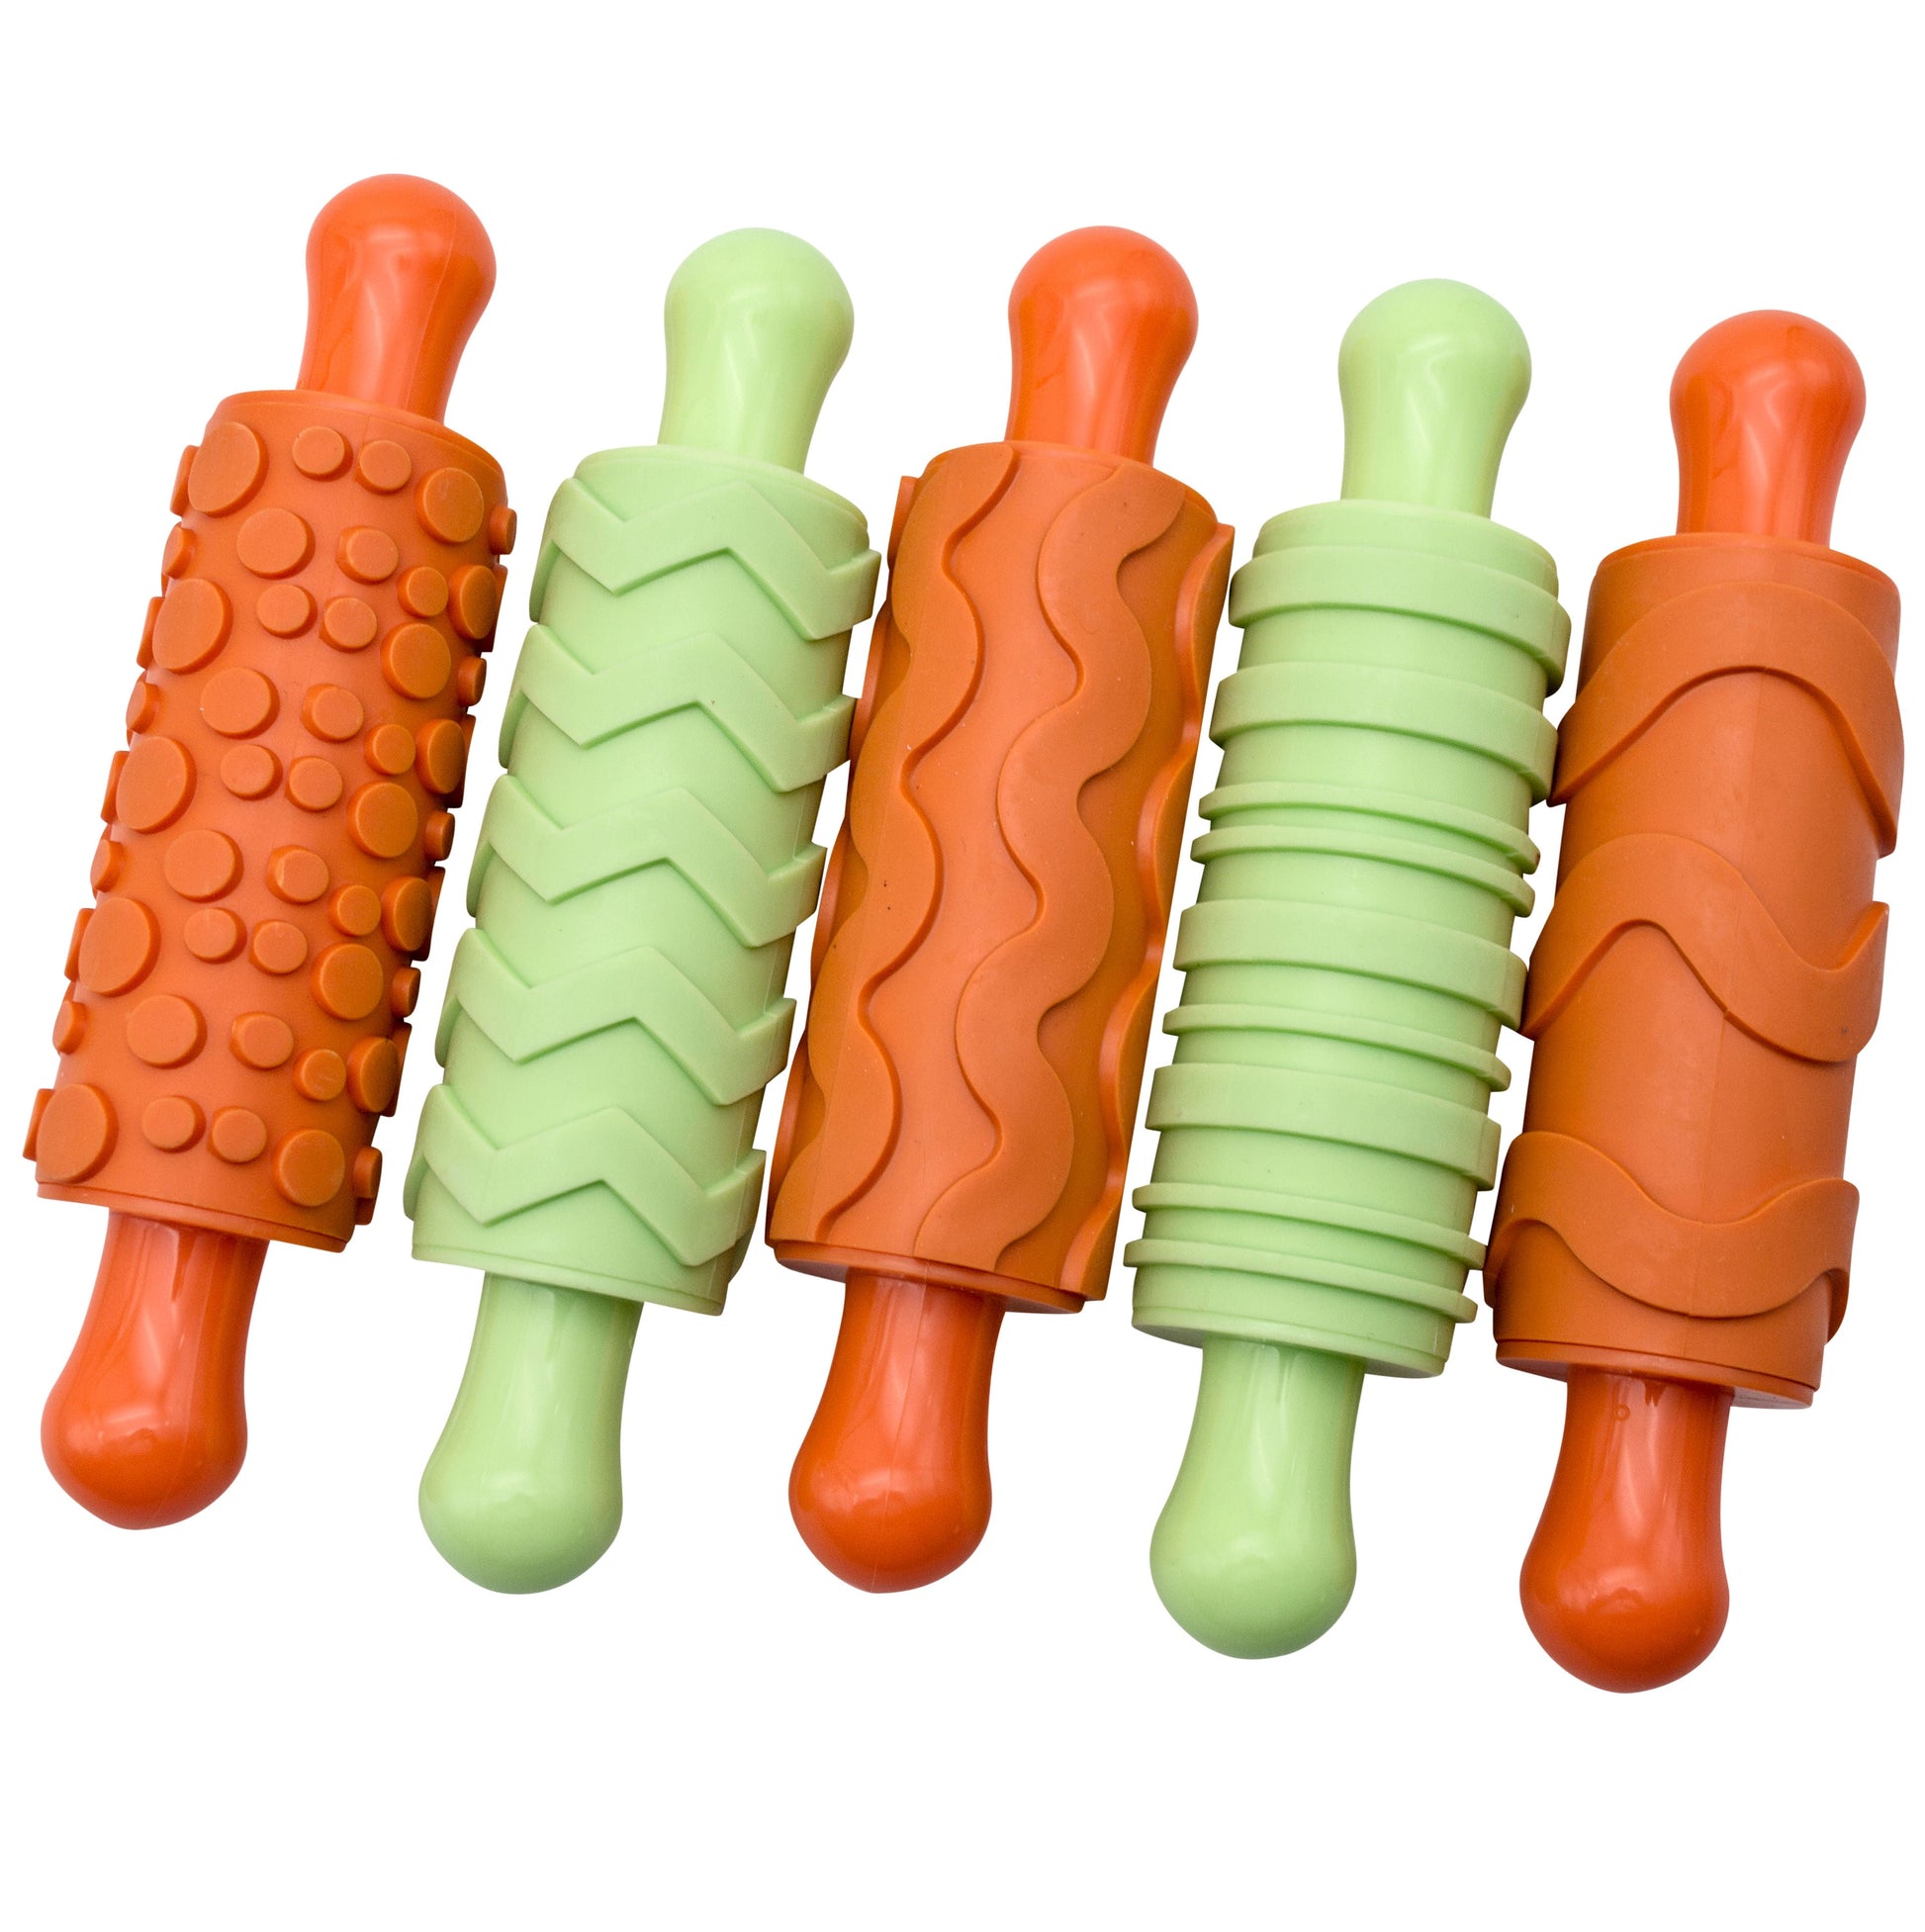 Patterns Rubber Rolling Pins | Learning and Exploring Through Play